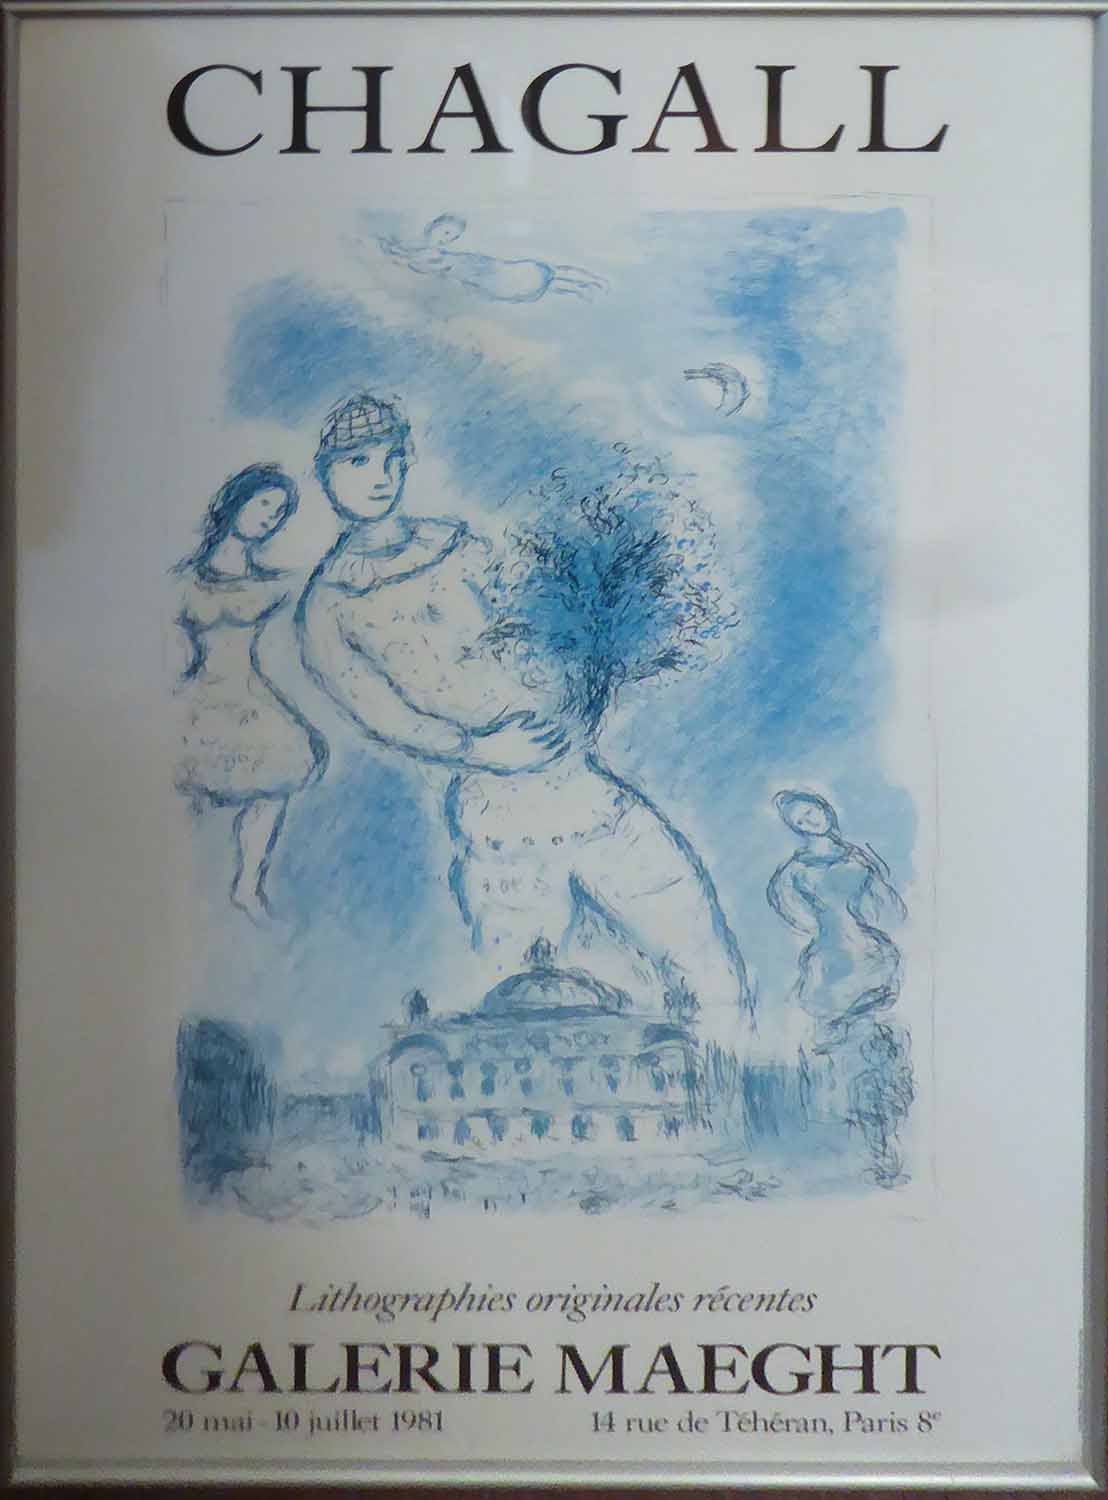 MARC CHAGALL 'Gallerie Maeght', 1981, offset lithograph poster, 91cm x 60cm, framed and glazed.